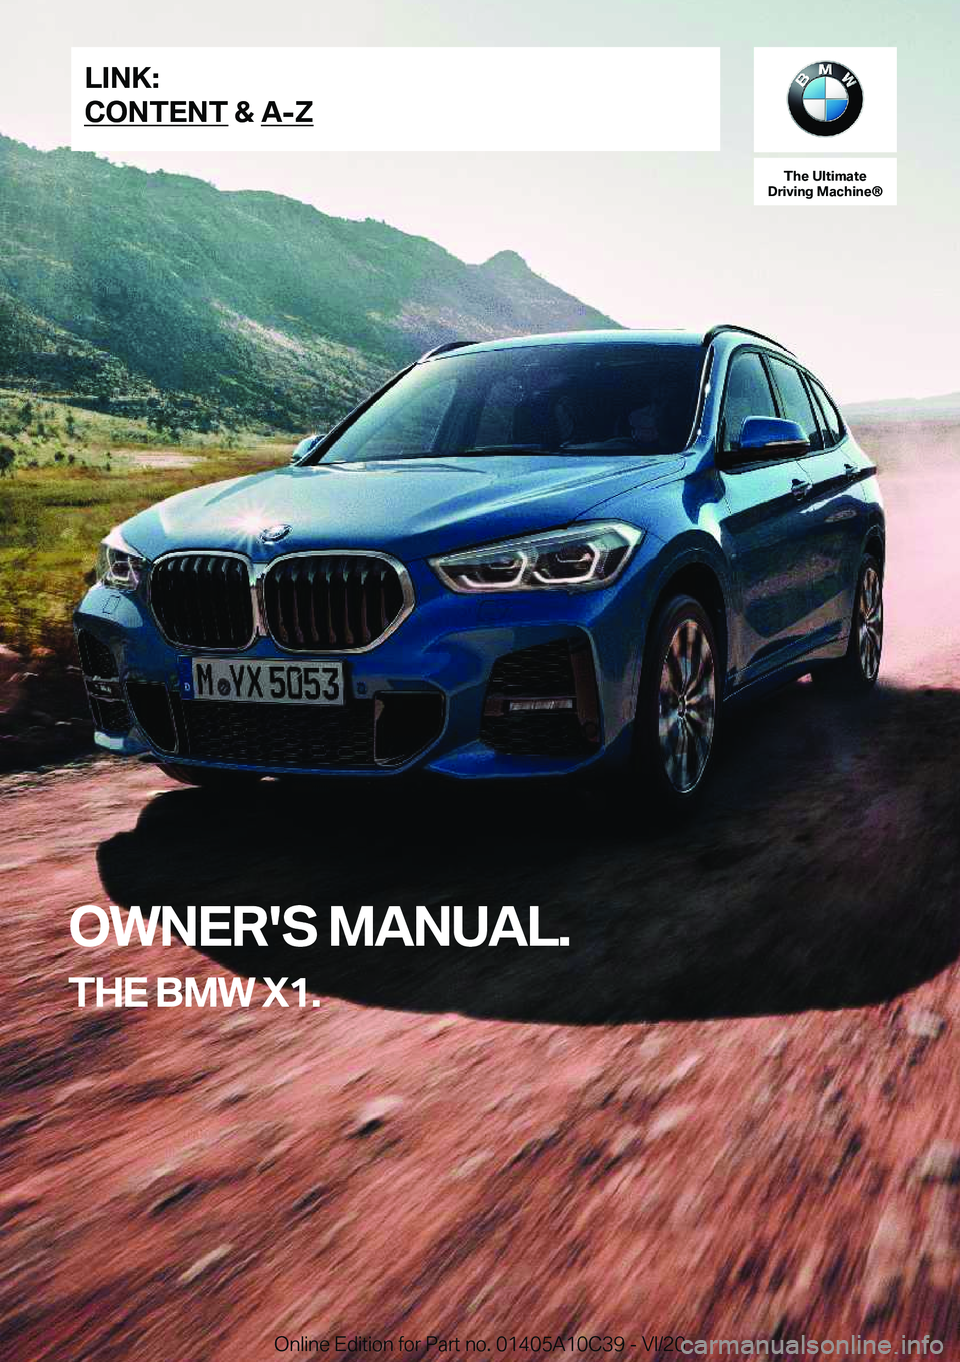 BMW X1 2021  Owners Manual �T�h�e��U�l�t�i�m�a�t�e
�D�r�i�v�i�n�g��M�a�c�h�i�n�e�n
�O�W�N�E�R�'�S��M�A�N�U�A�L�.
�T�H�E��B�M�W��X�1�.�L�I�N�K�:
�C�O�N�T�E�N�T��&��A�-�Z�O�n�l�i�n�e��E�d�i�t�i�o�n��f�o�r��P�a�r�t�